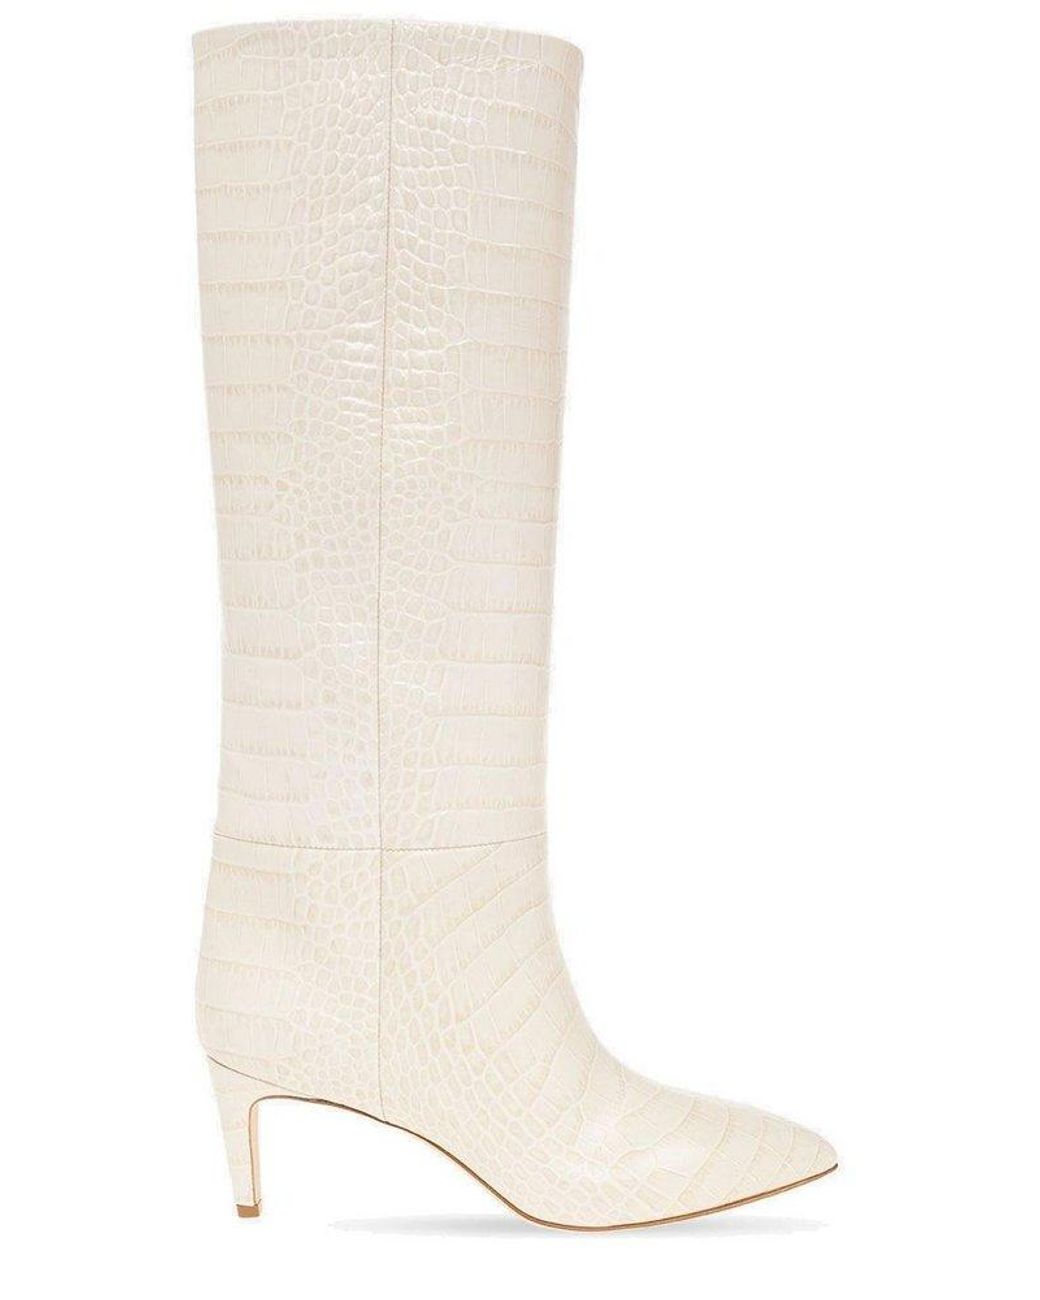 Paris Texas Pointed Toe Mid Heel Boots in White | Lyst